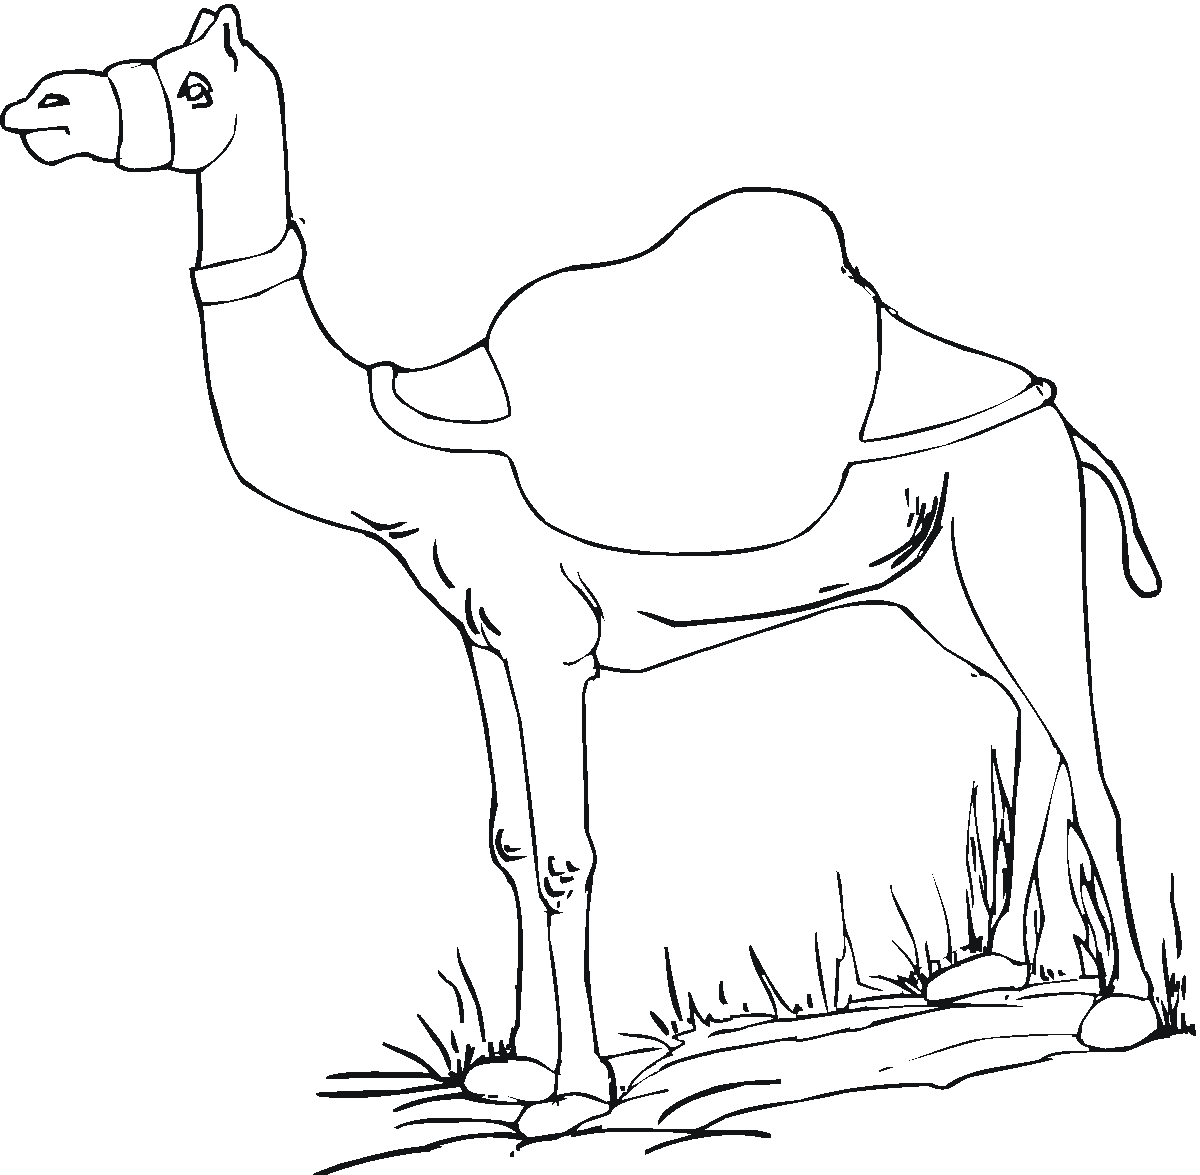 camel pages for coloring - photo #20